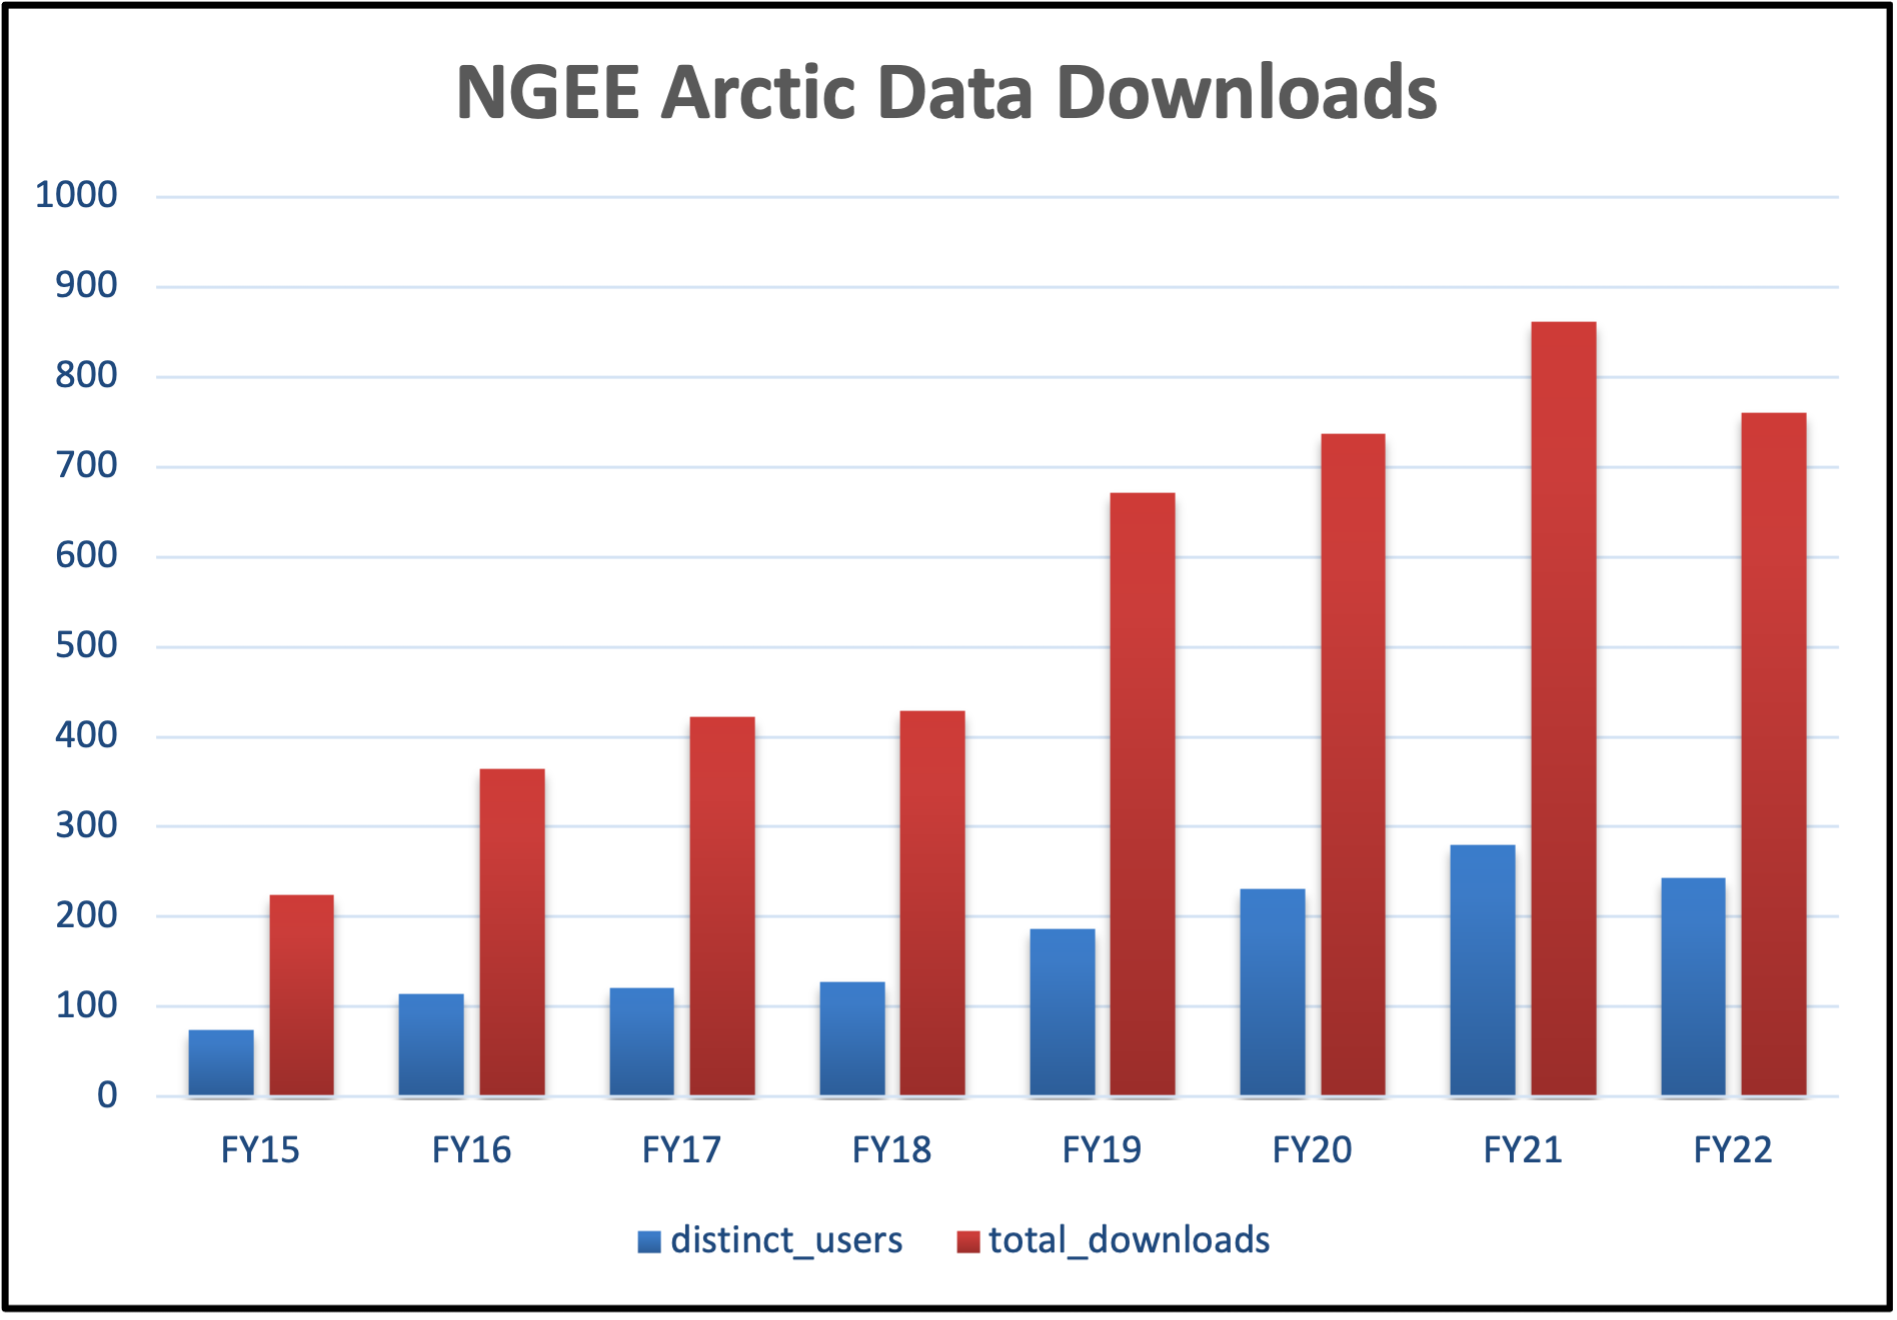 Number of data downloads and unique users (members of the NGEE Arctic Data Management Team are not included) per year.